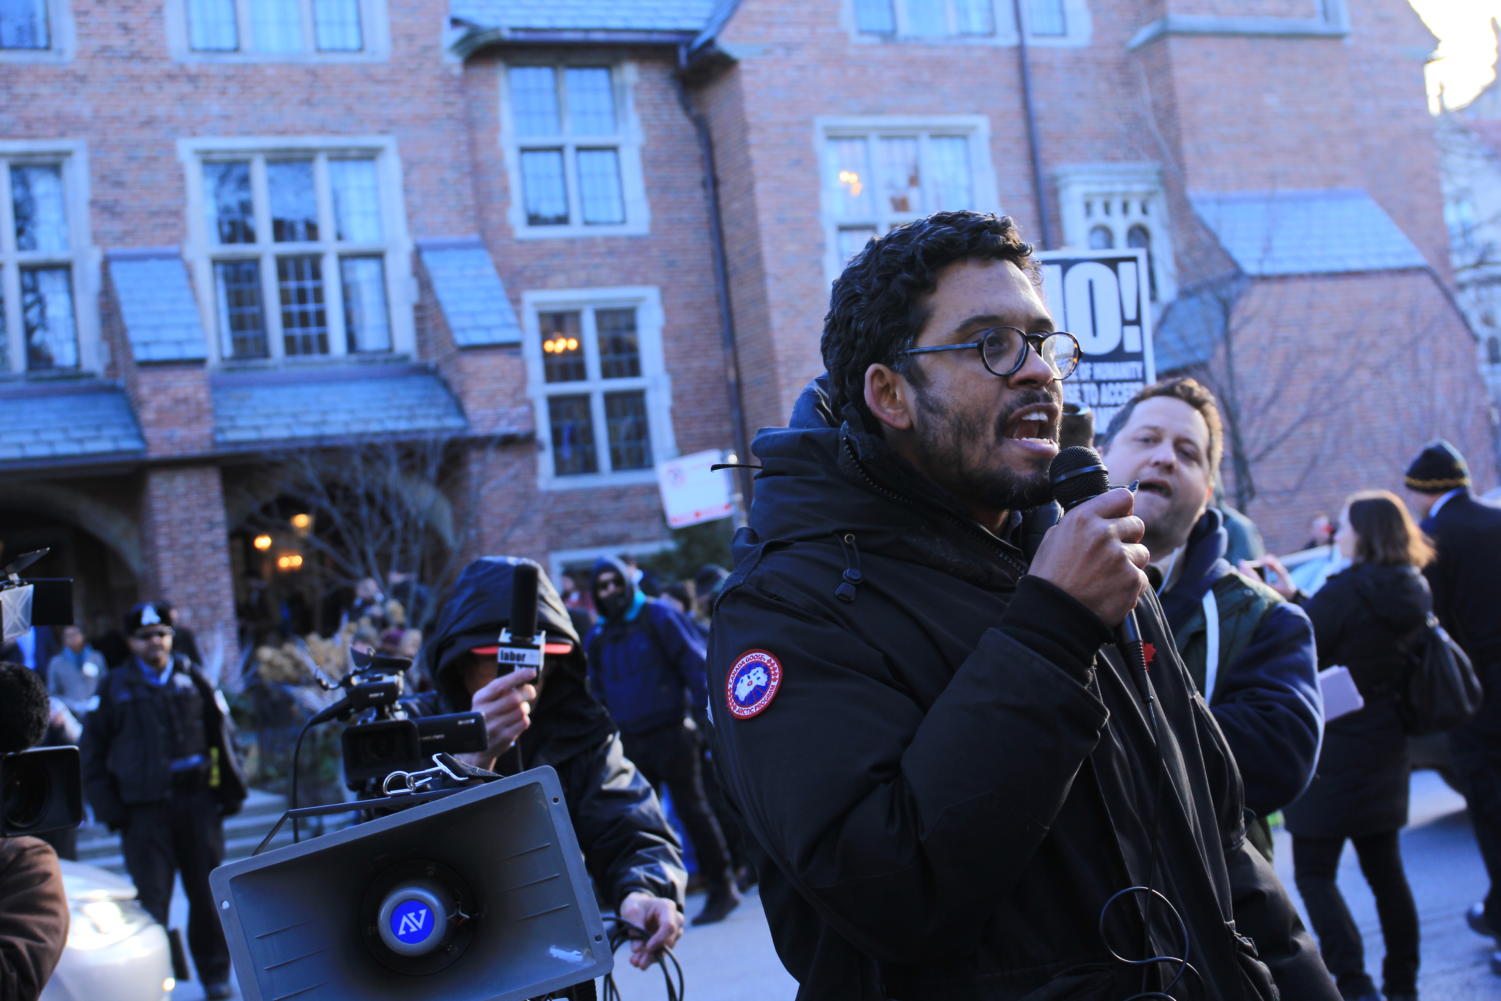 Anton Ford, a philosophy professor associated with UofC Resists, leads chants at an event featuring Corey Lewandowski.